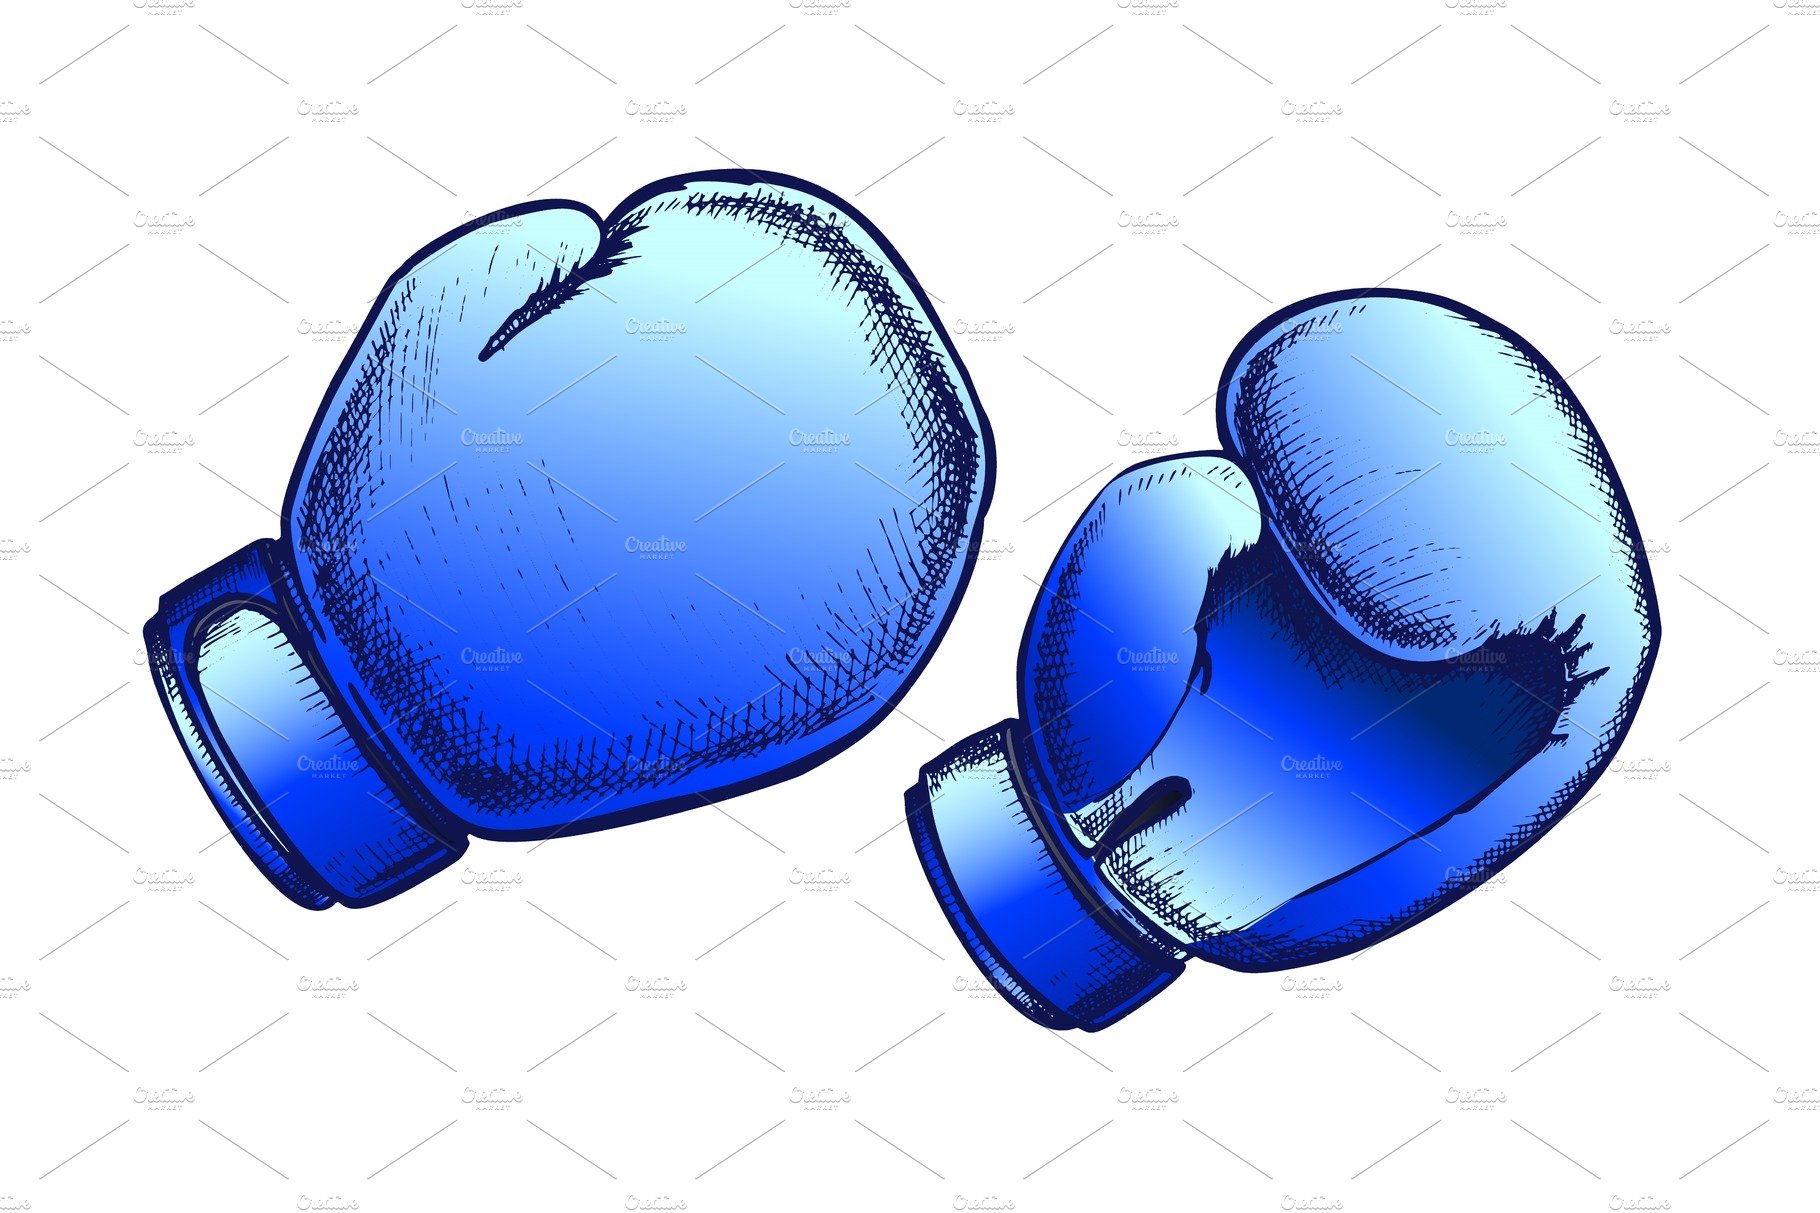 Boxing Gloves Sportive Equipment cover image.